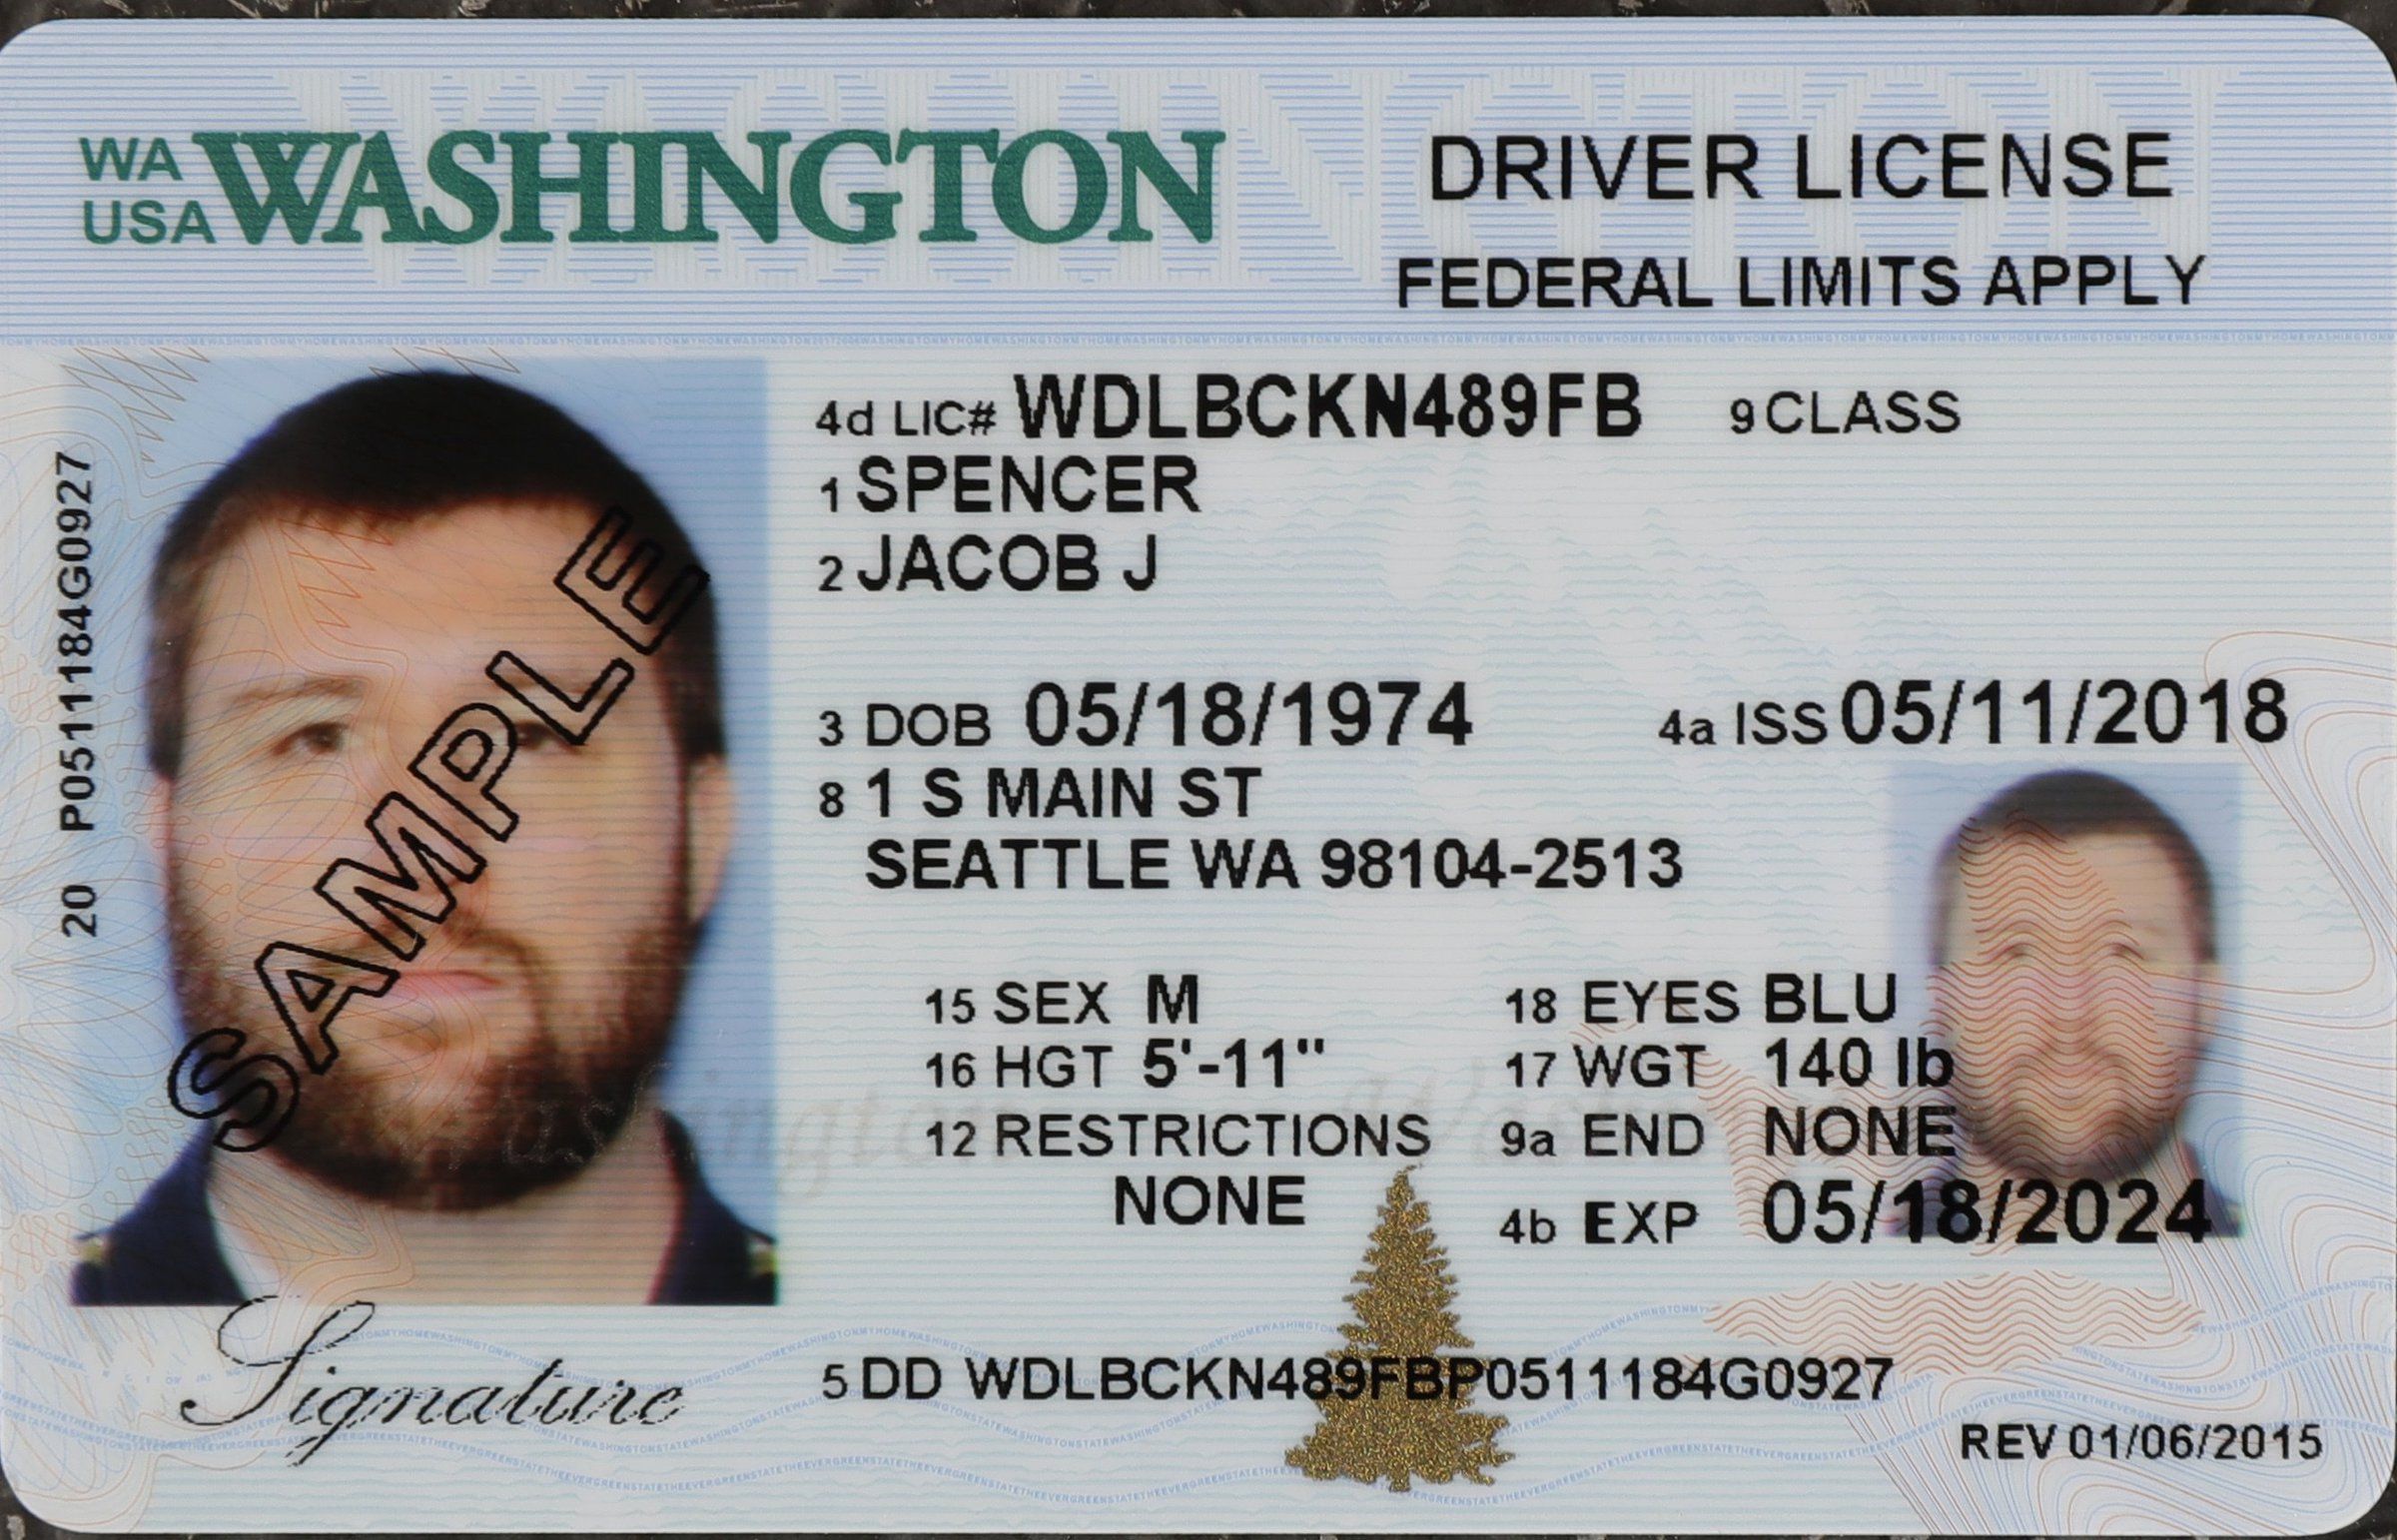 when do i need an enhanced drivers license to fly from wa